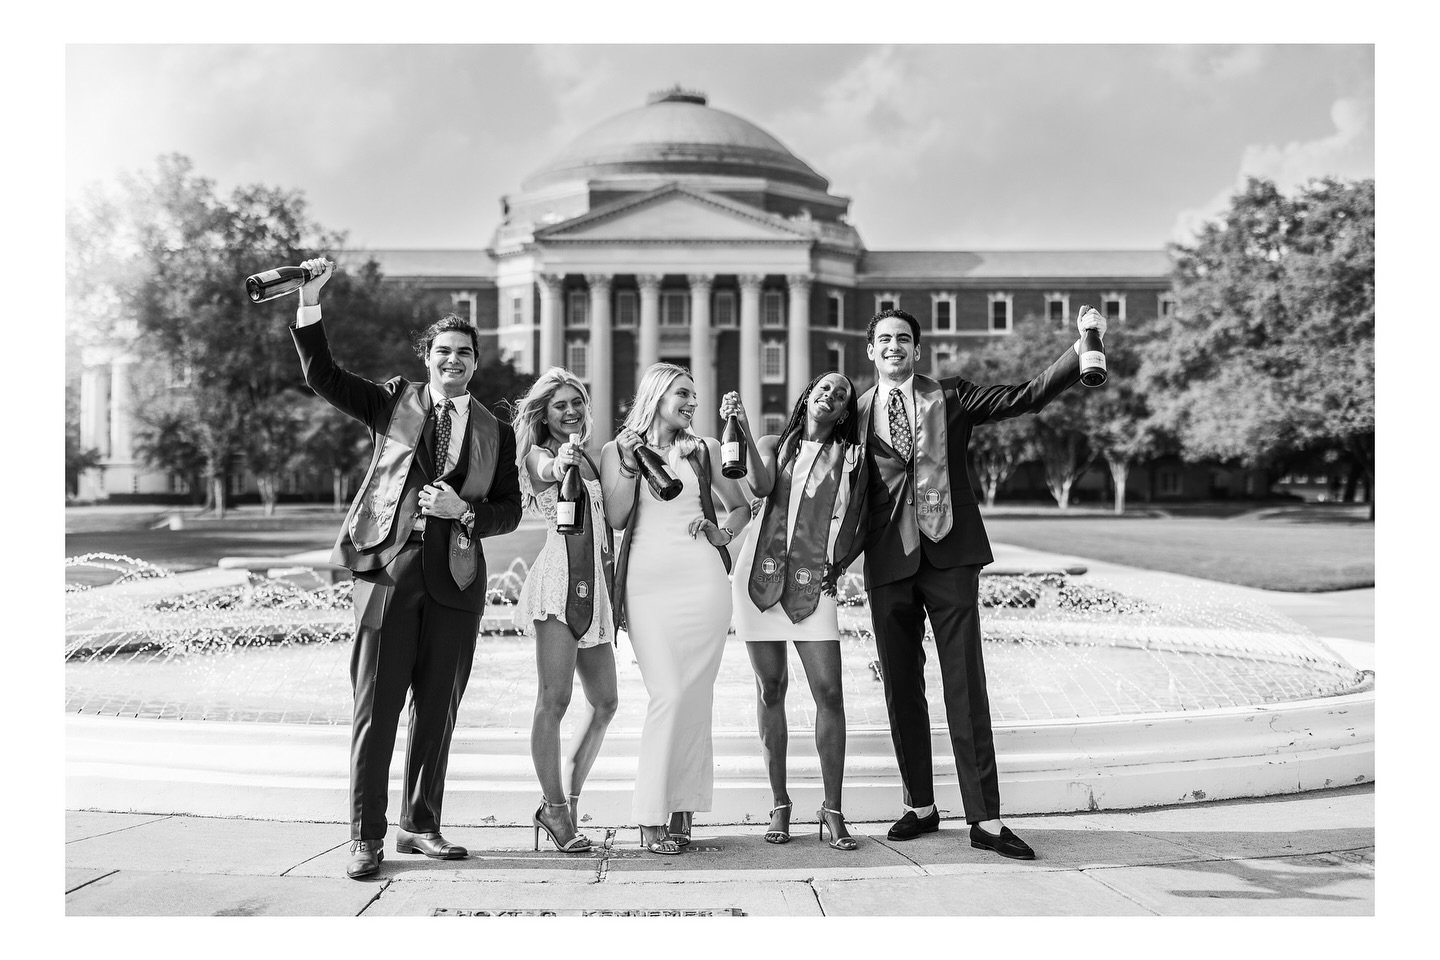 Yep, group graduation photos is definitely the move. Get your core group of friends together, and document this moment in time! Wish I had something like this when I was younger. Adding to my list of services immediately! 

#classof2024 #smu #smumust